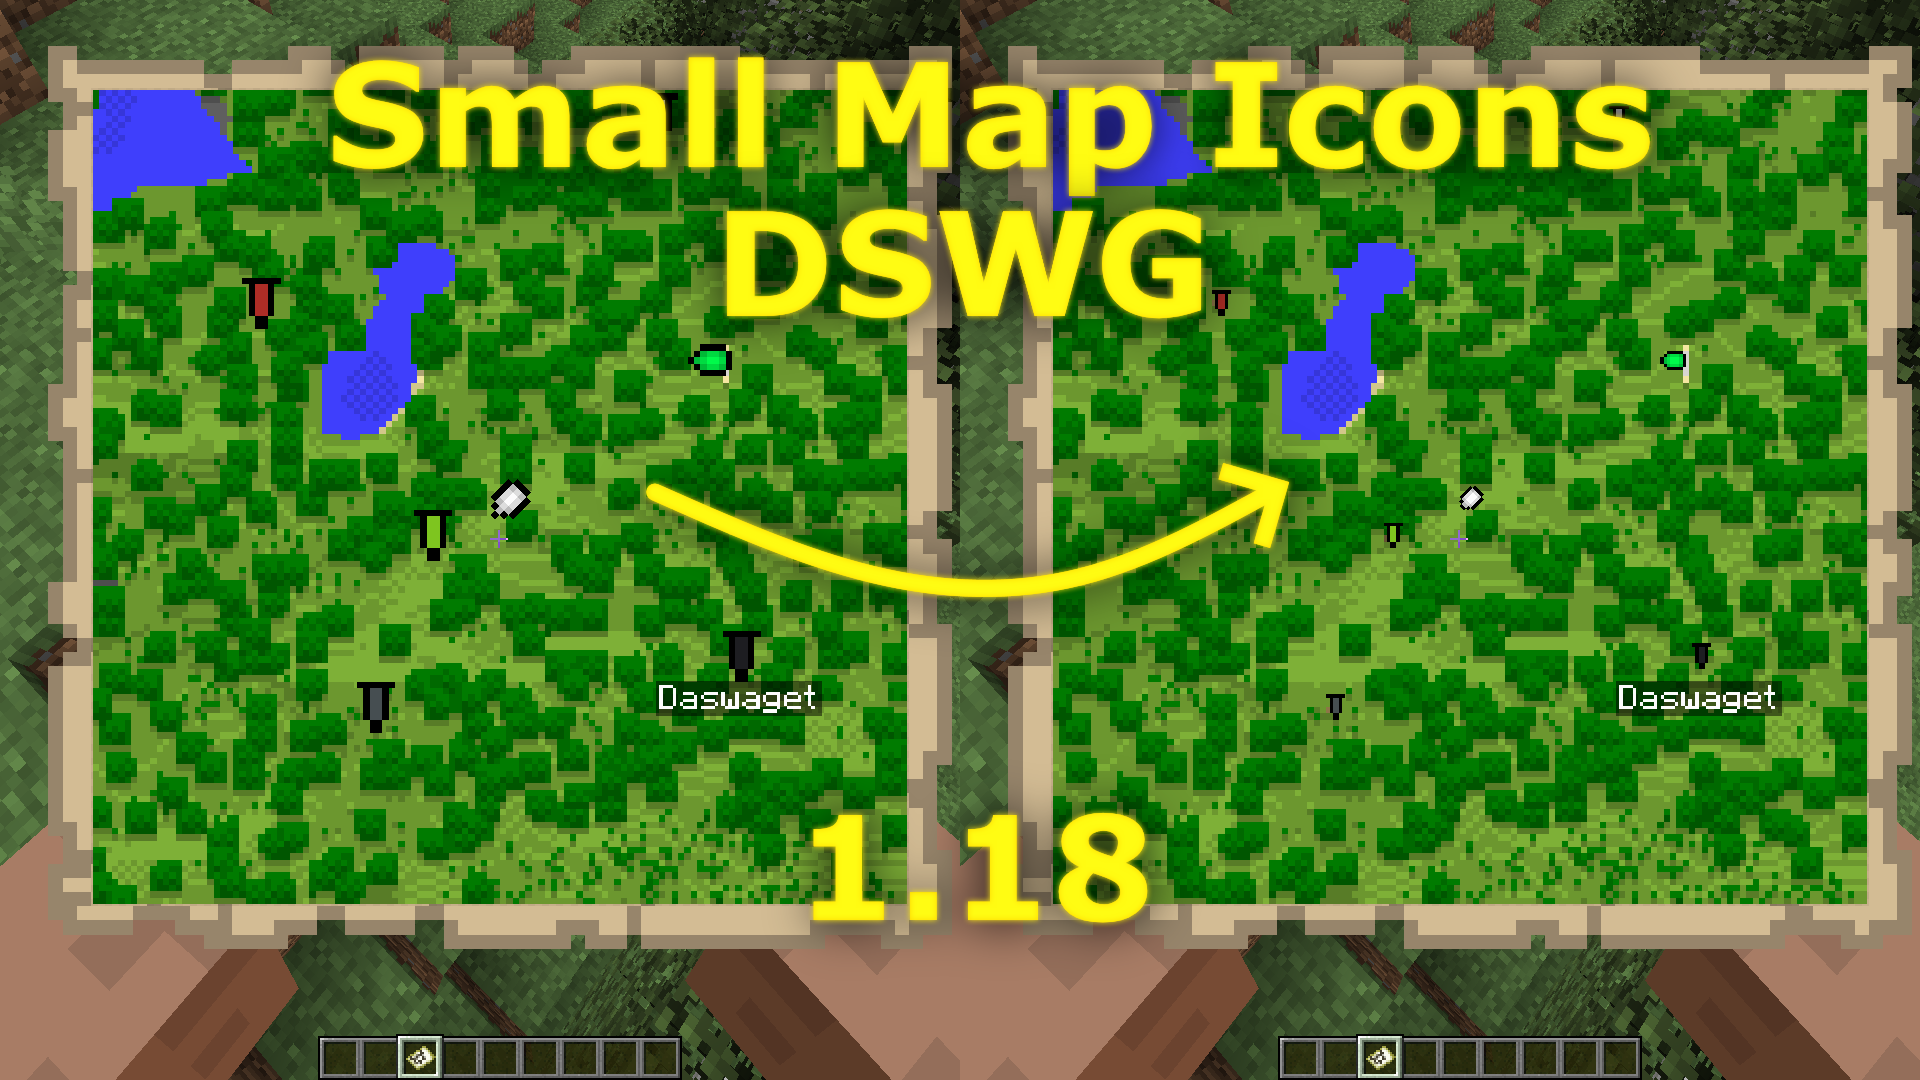 DSWG Small Map Icons